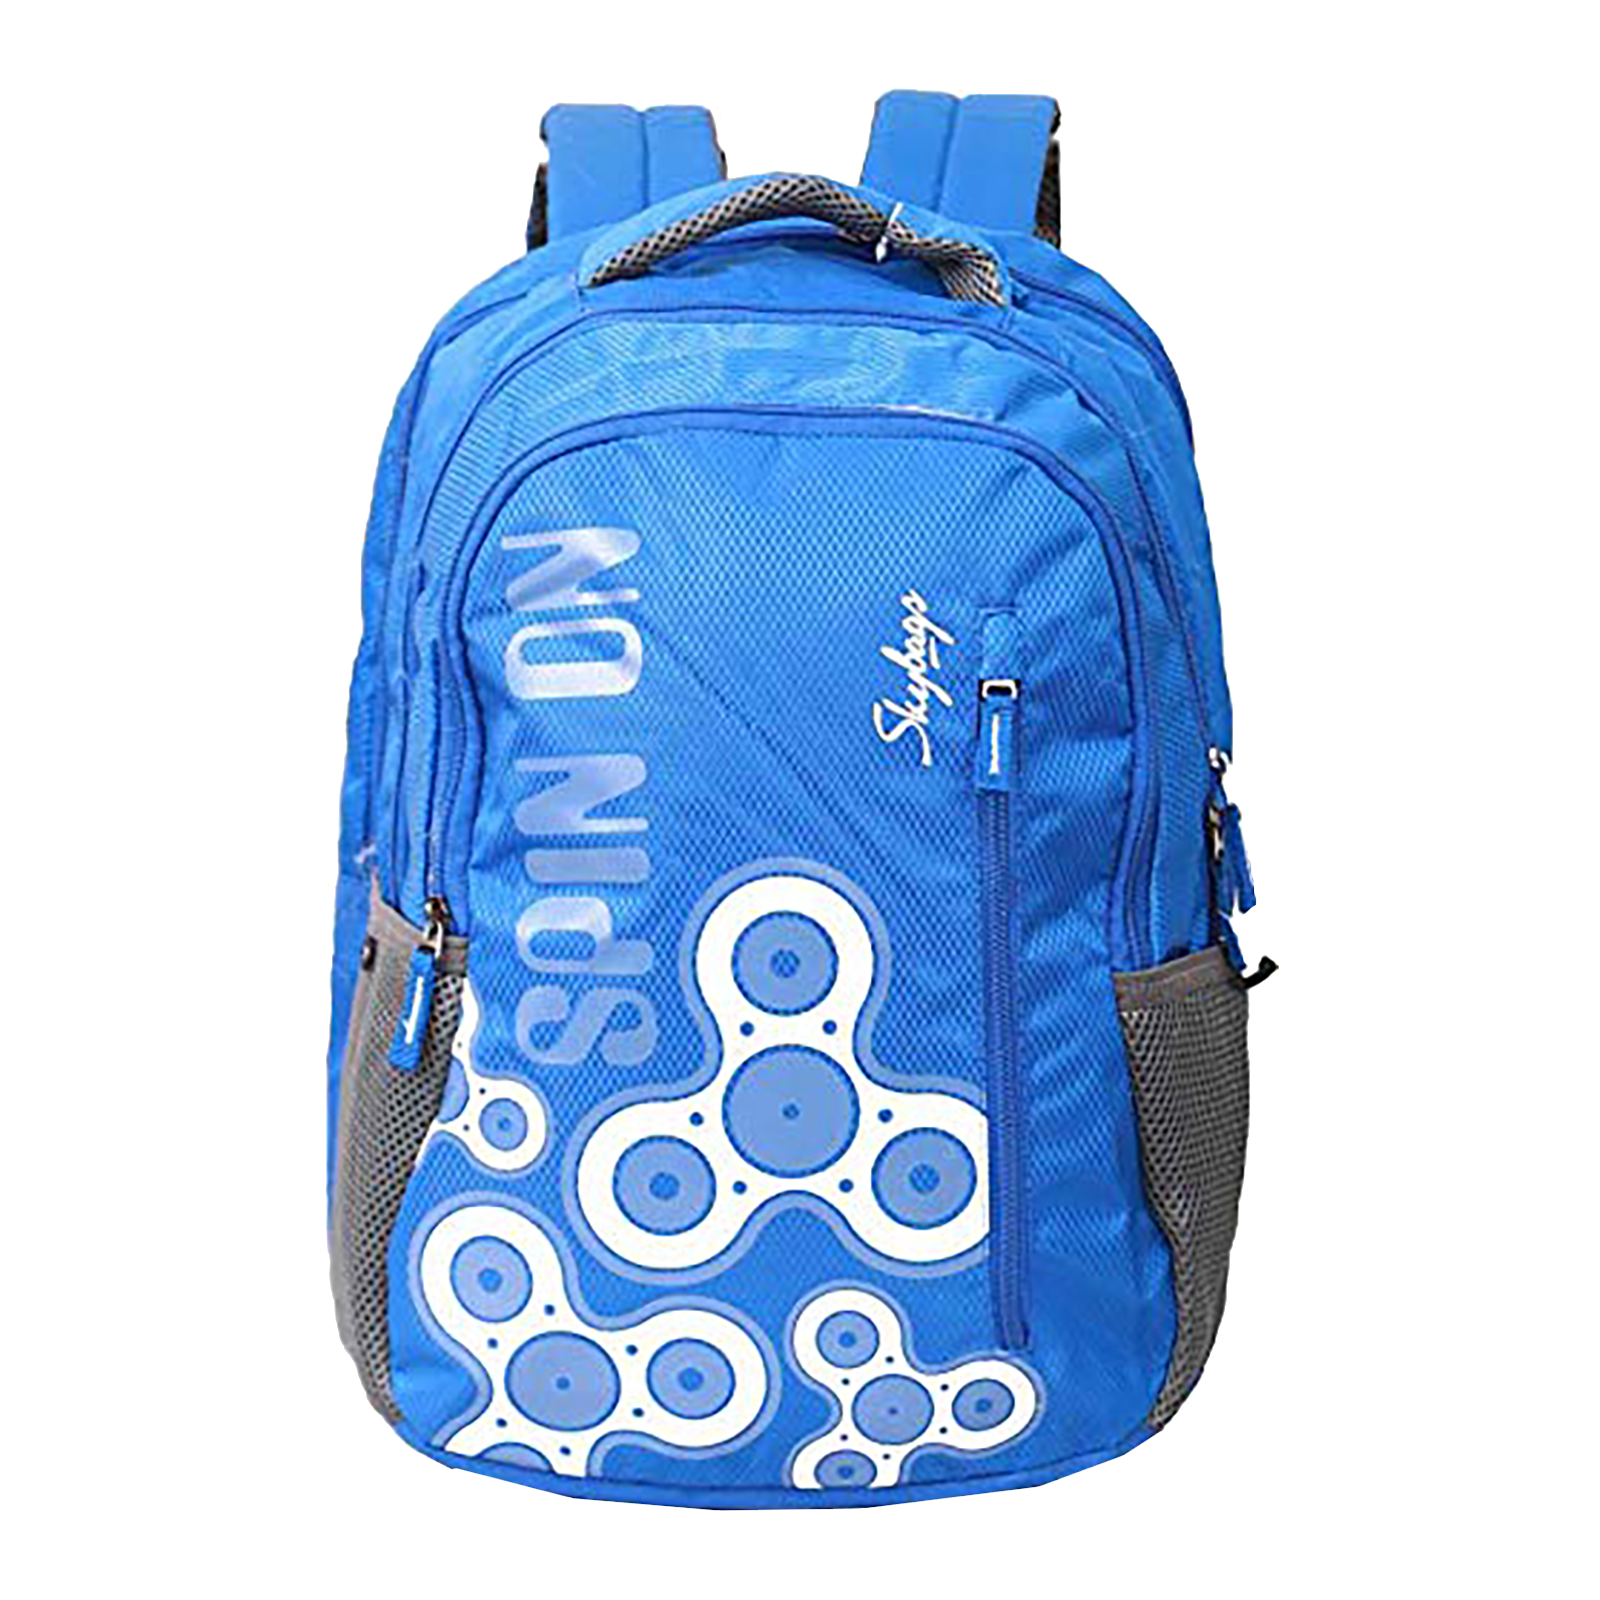 Skybags New Neon 30 Litres Polyester Backpack (3 Compartments, BPNNE8HBLU, Blue)